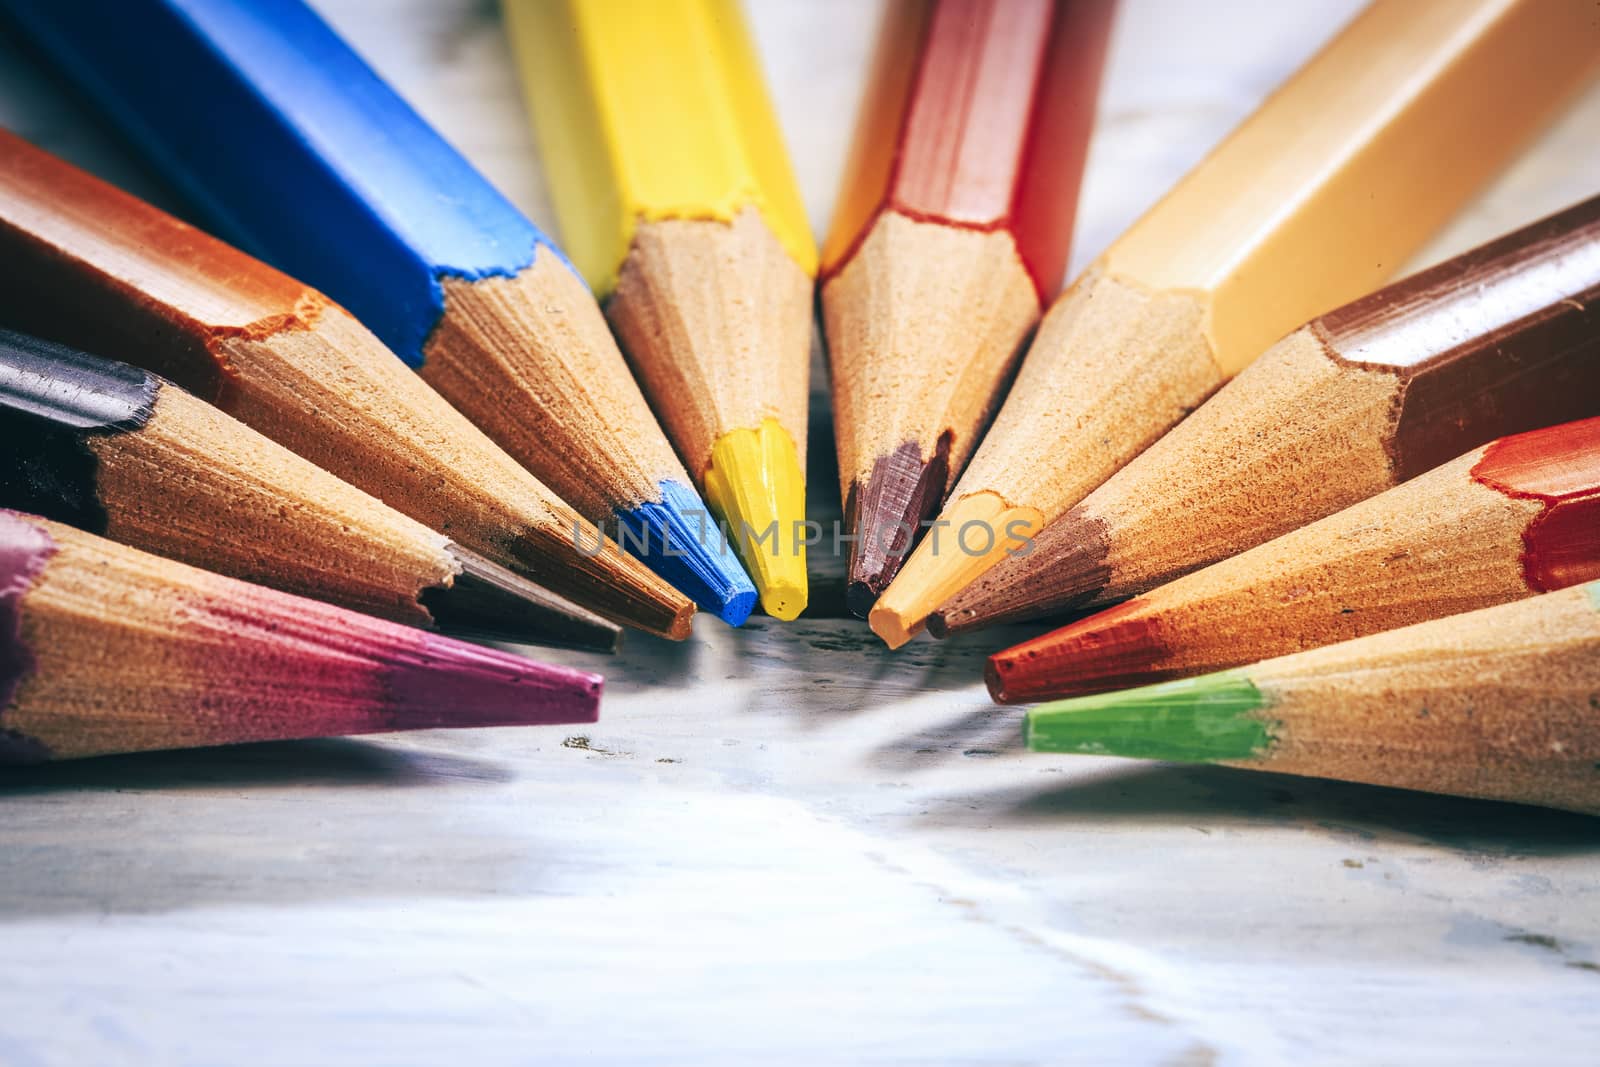 Group of color pencils in black and white by nachrc2001